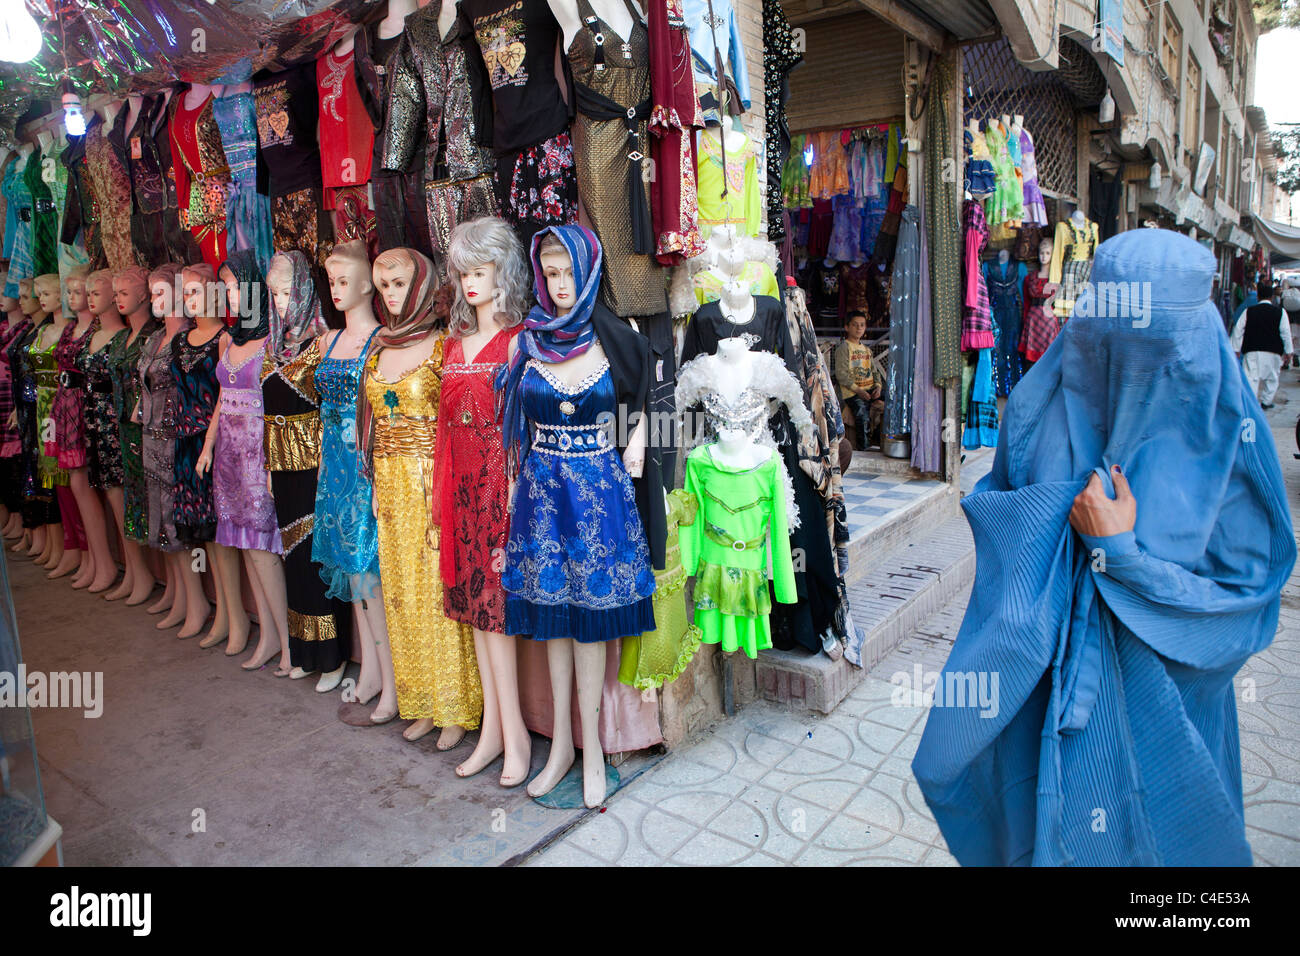 clothes shop in herat, Afghanistan Stock Photo